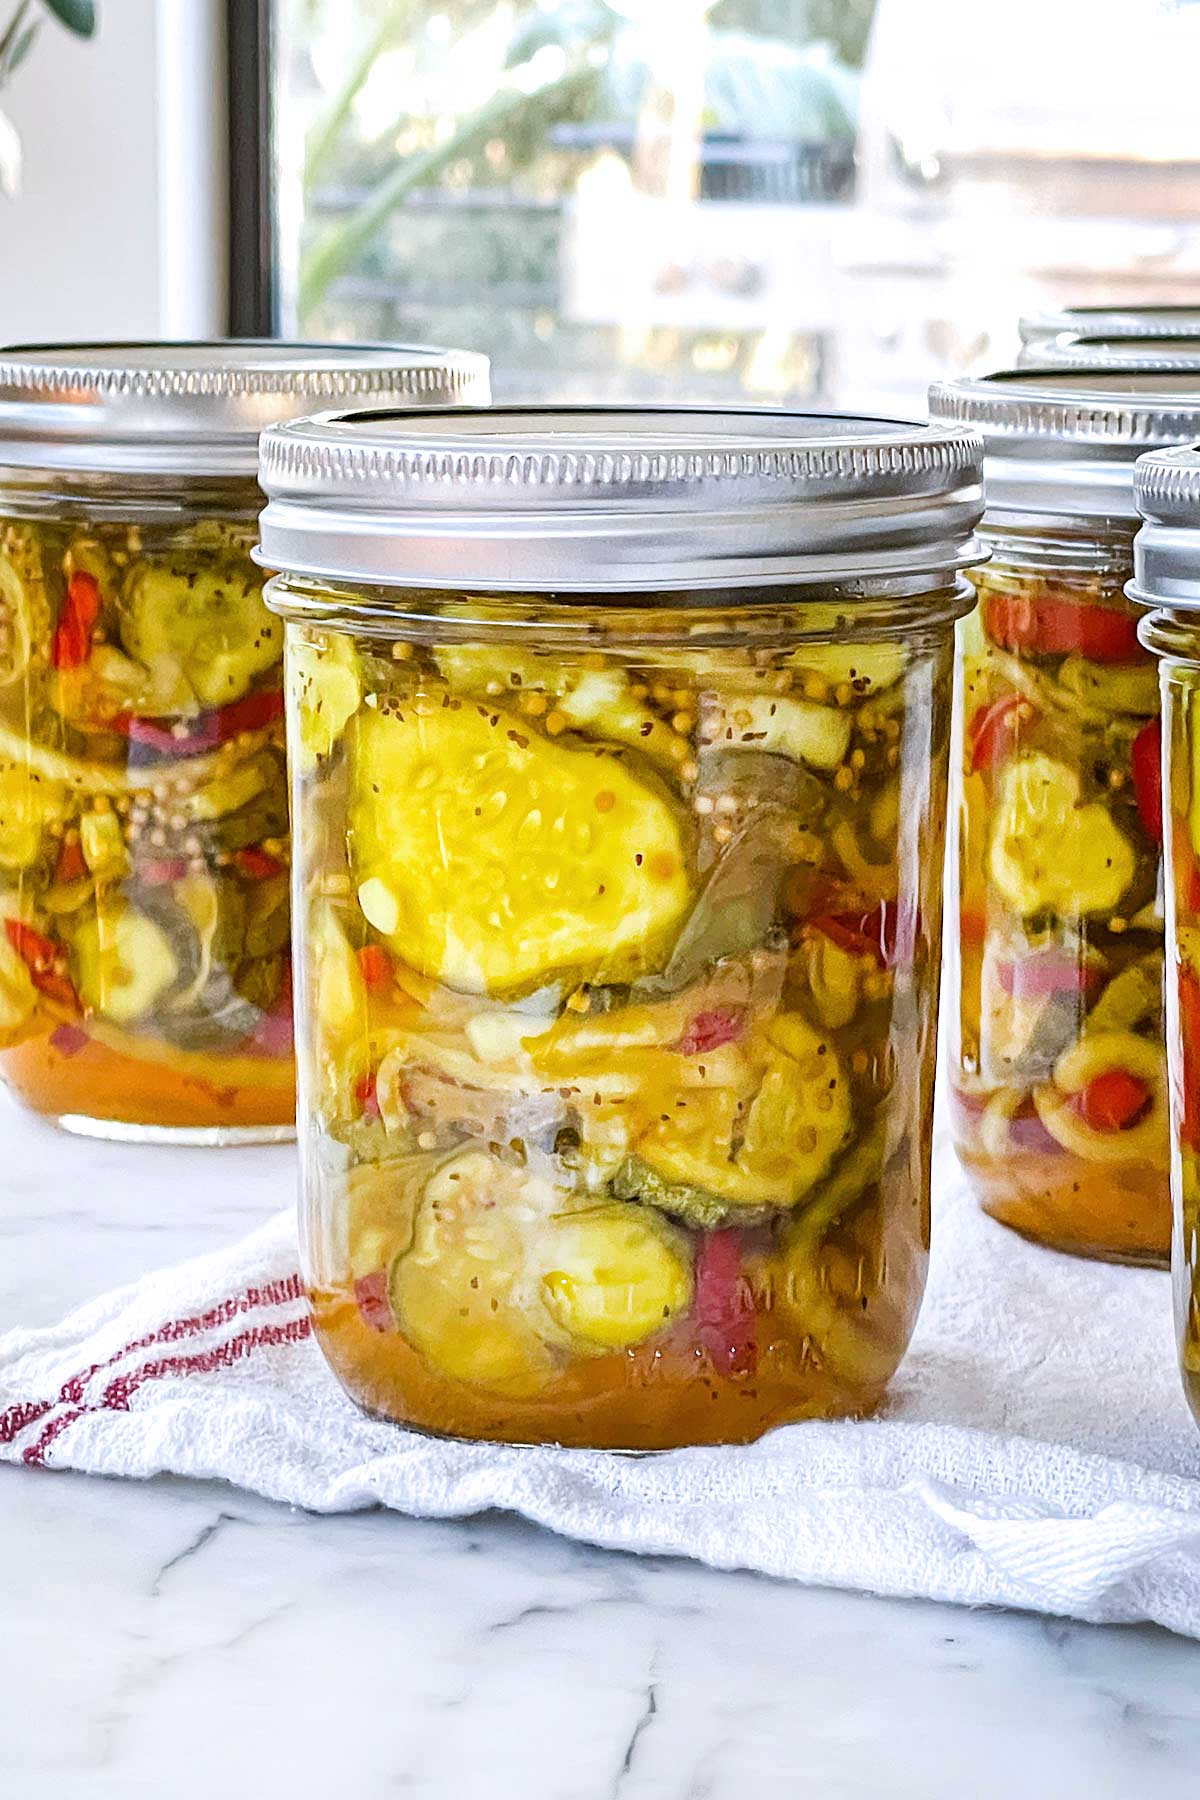 Bread And Butter Pickles Foodiecrush.com 1 